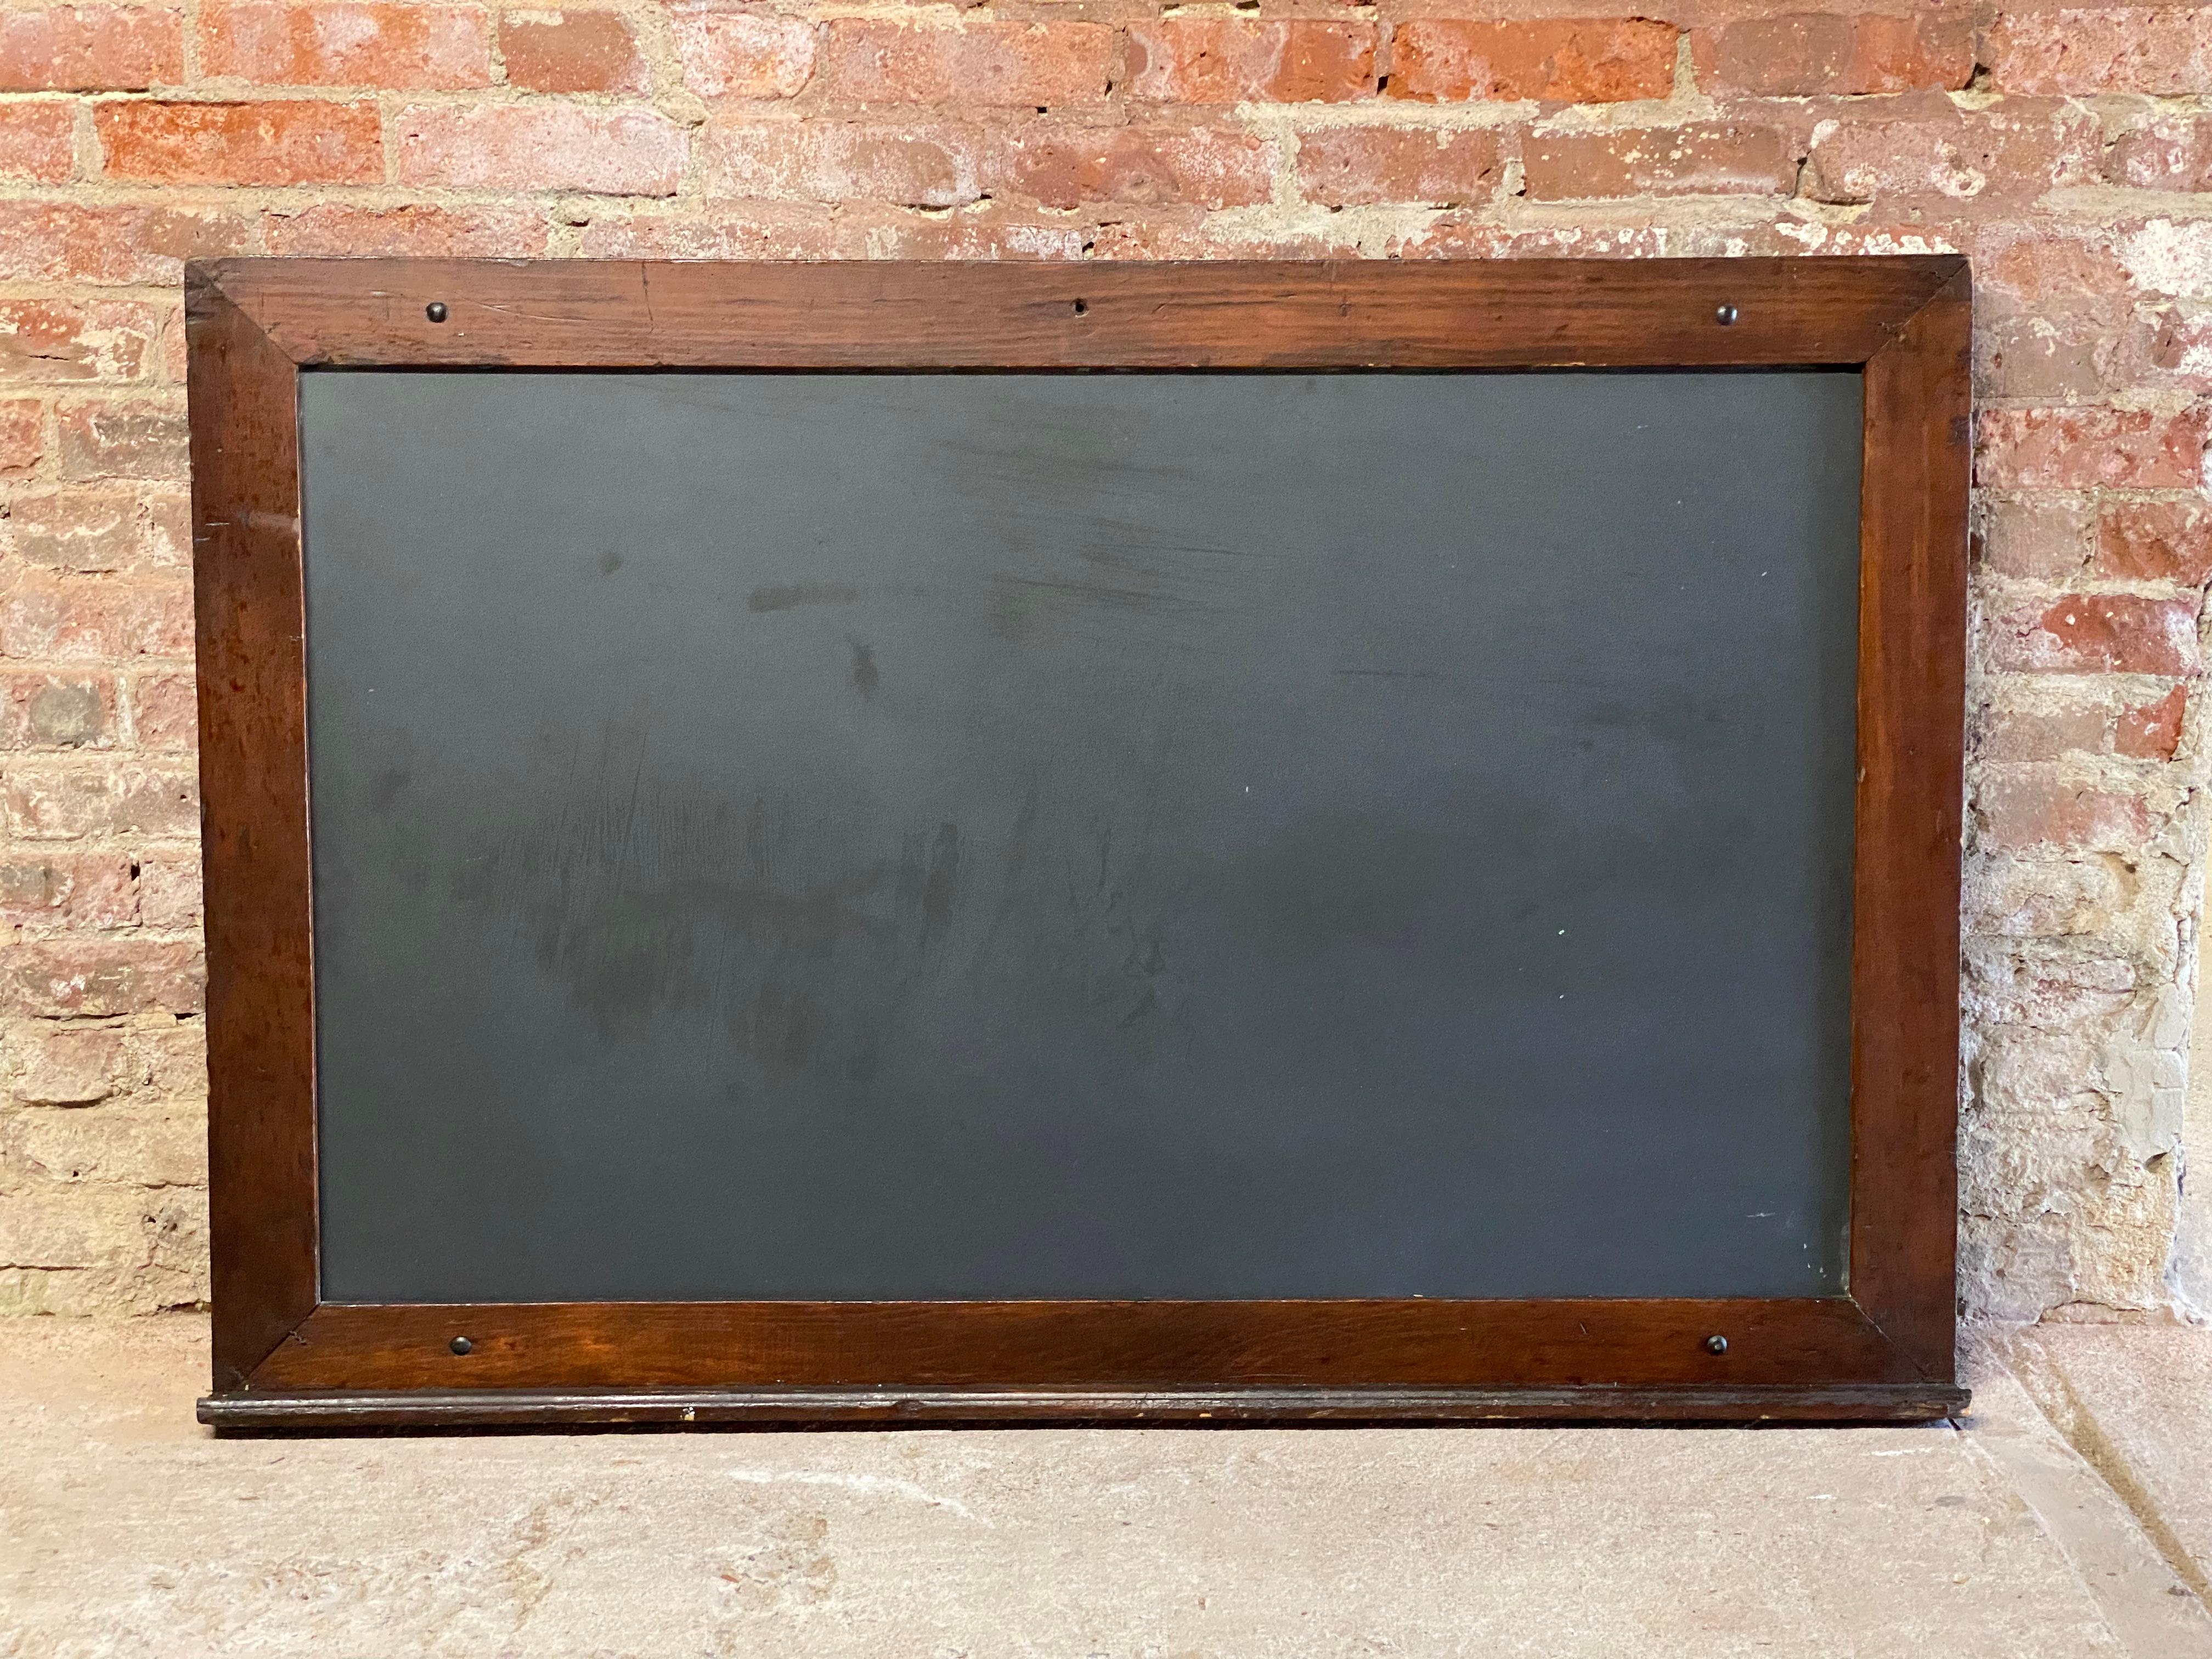 Large old schoolhouse slate blackboard. Circa 1900-30. Just the right size for the home, restaurant, bar or office. Not too big, not too small. The thick hand hewn slate board is framed in a soft wood like pine or birch. Nice corrugated metal spline